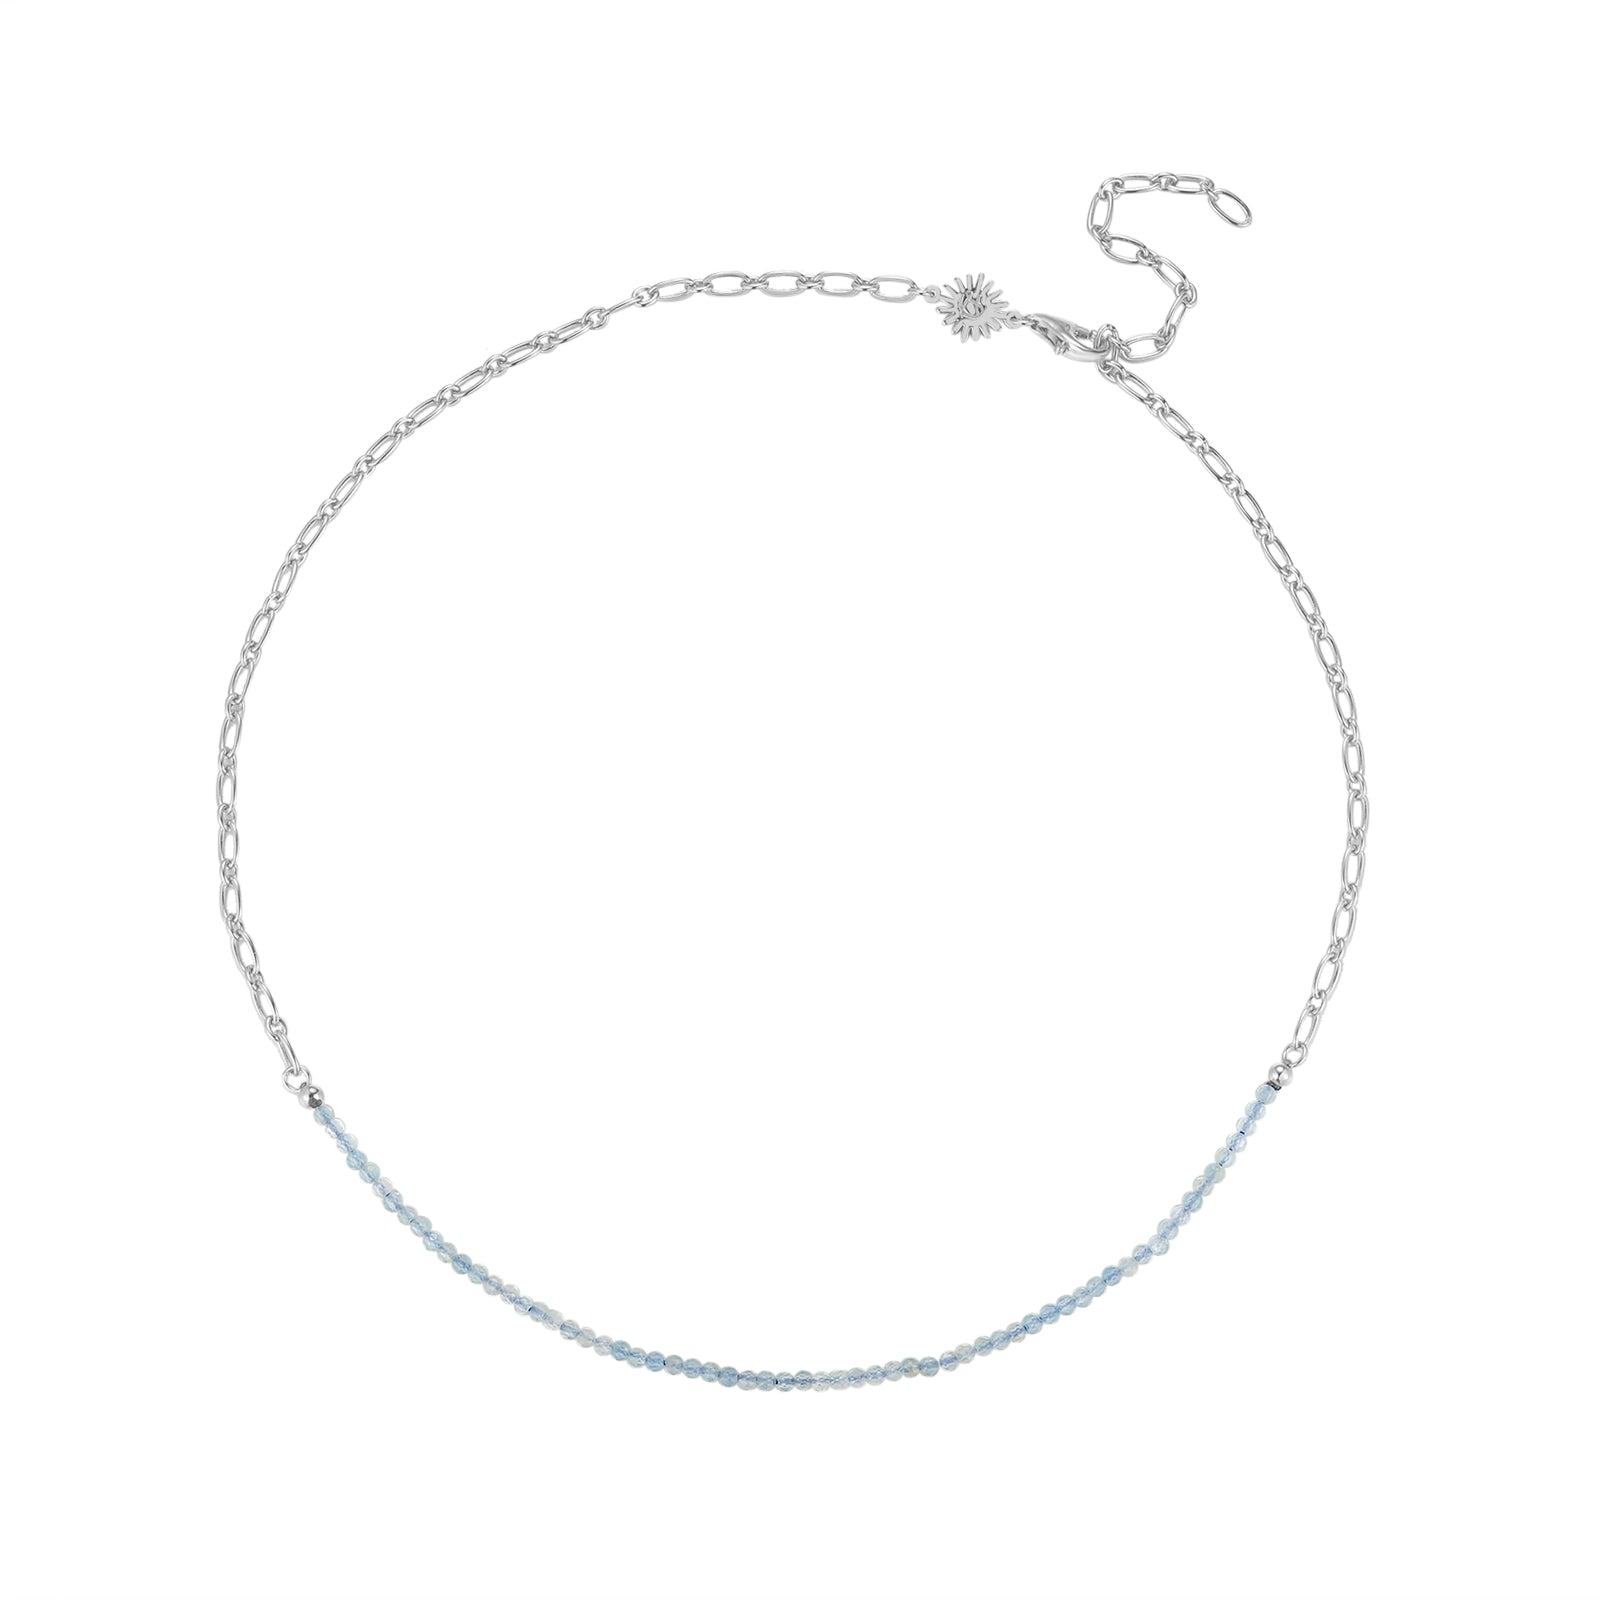 Aquamarine Silver Oval Link Necklace Chain | LOVE BY THE MOON